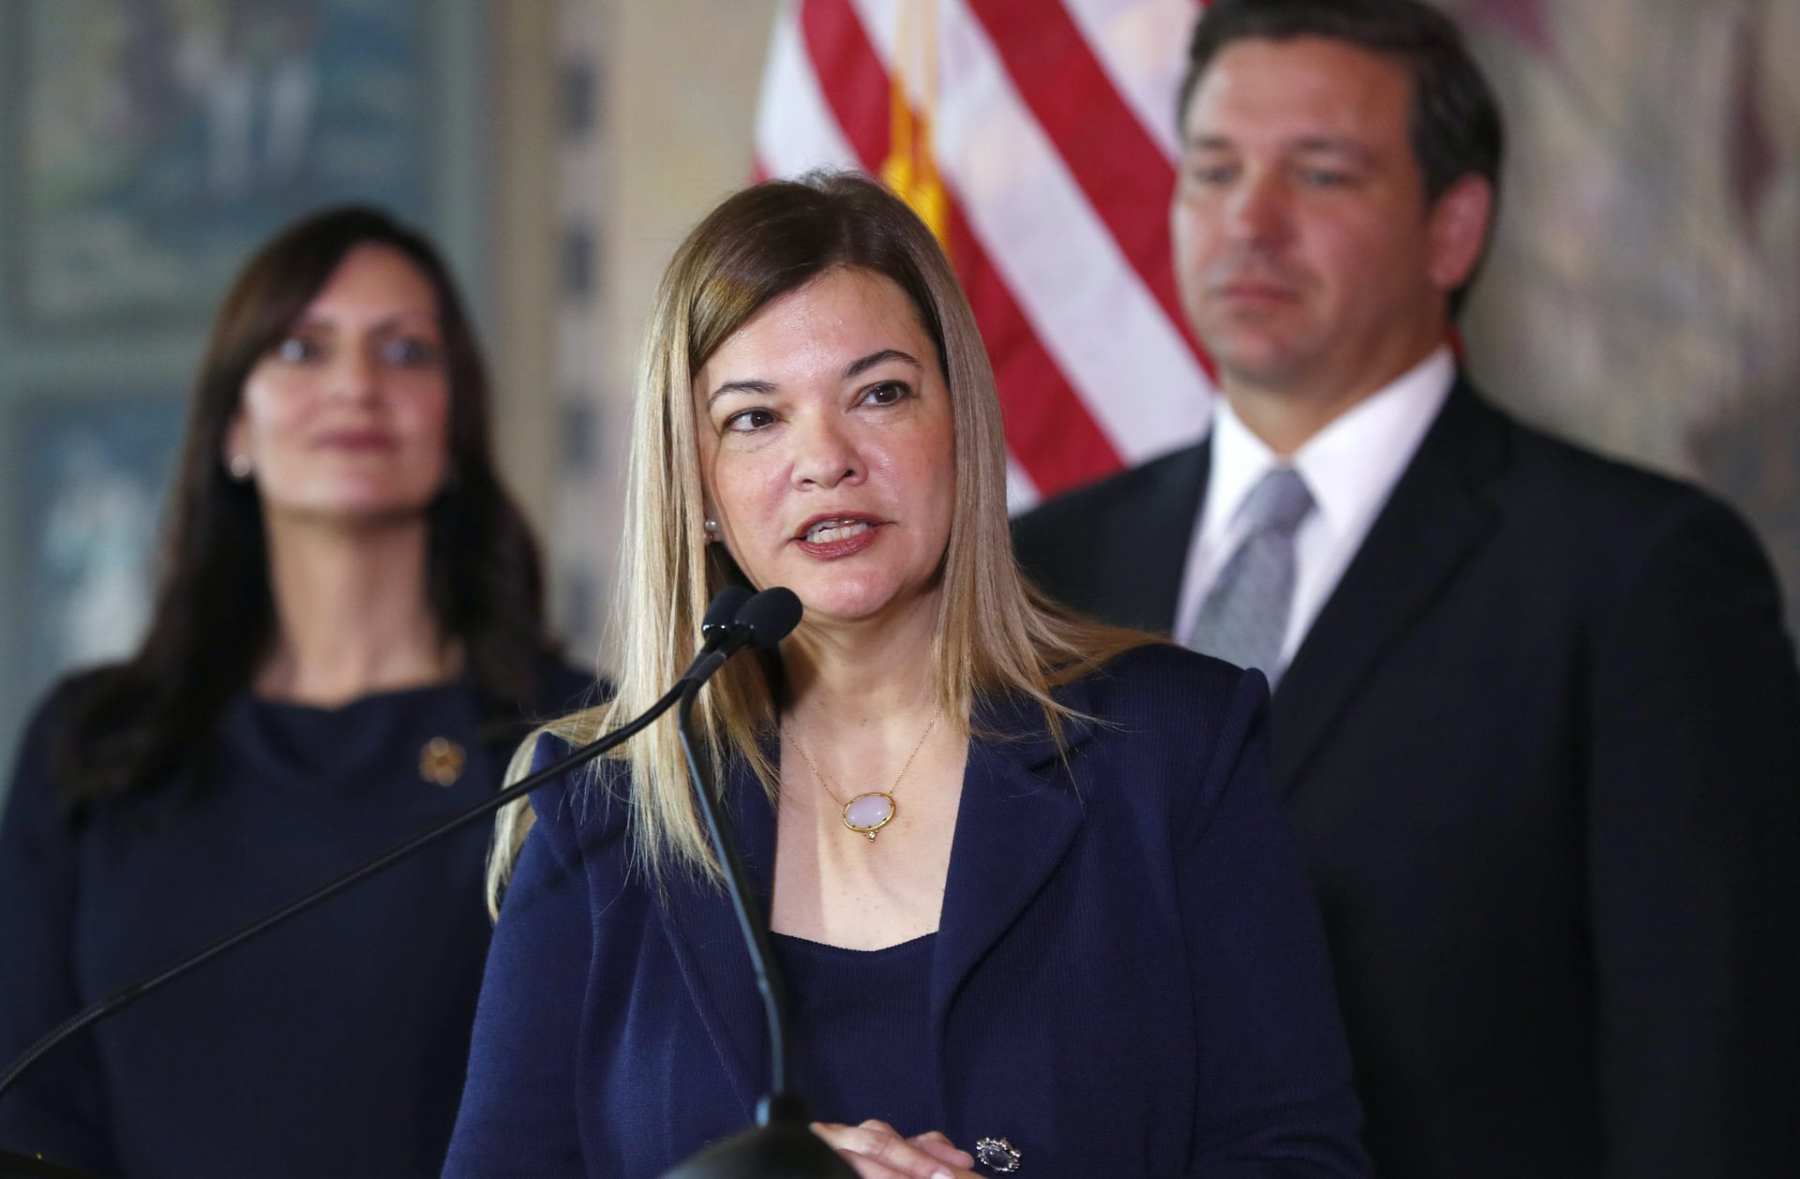 Barbara Lagoa, center, Governor Ron DeSantis' pick for the Florida Supreme Court, speaks after being introduced, as DeSantis and Lieutenant Governor Jeanette Nunez, left, look on, Wednesday, Jan. 9, 2019, in Miami. (AP Photo/Wilfredo Lee)